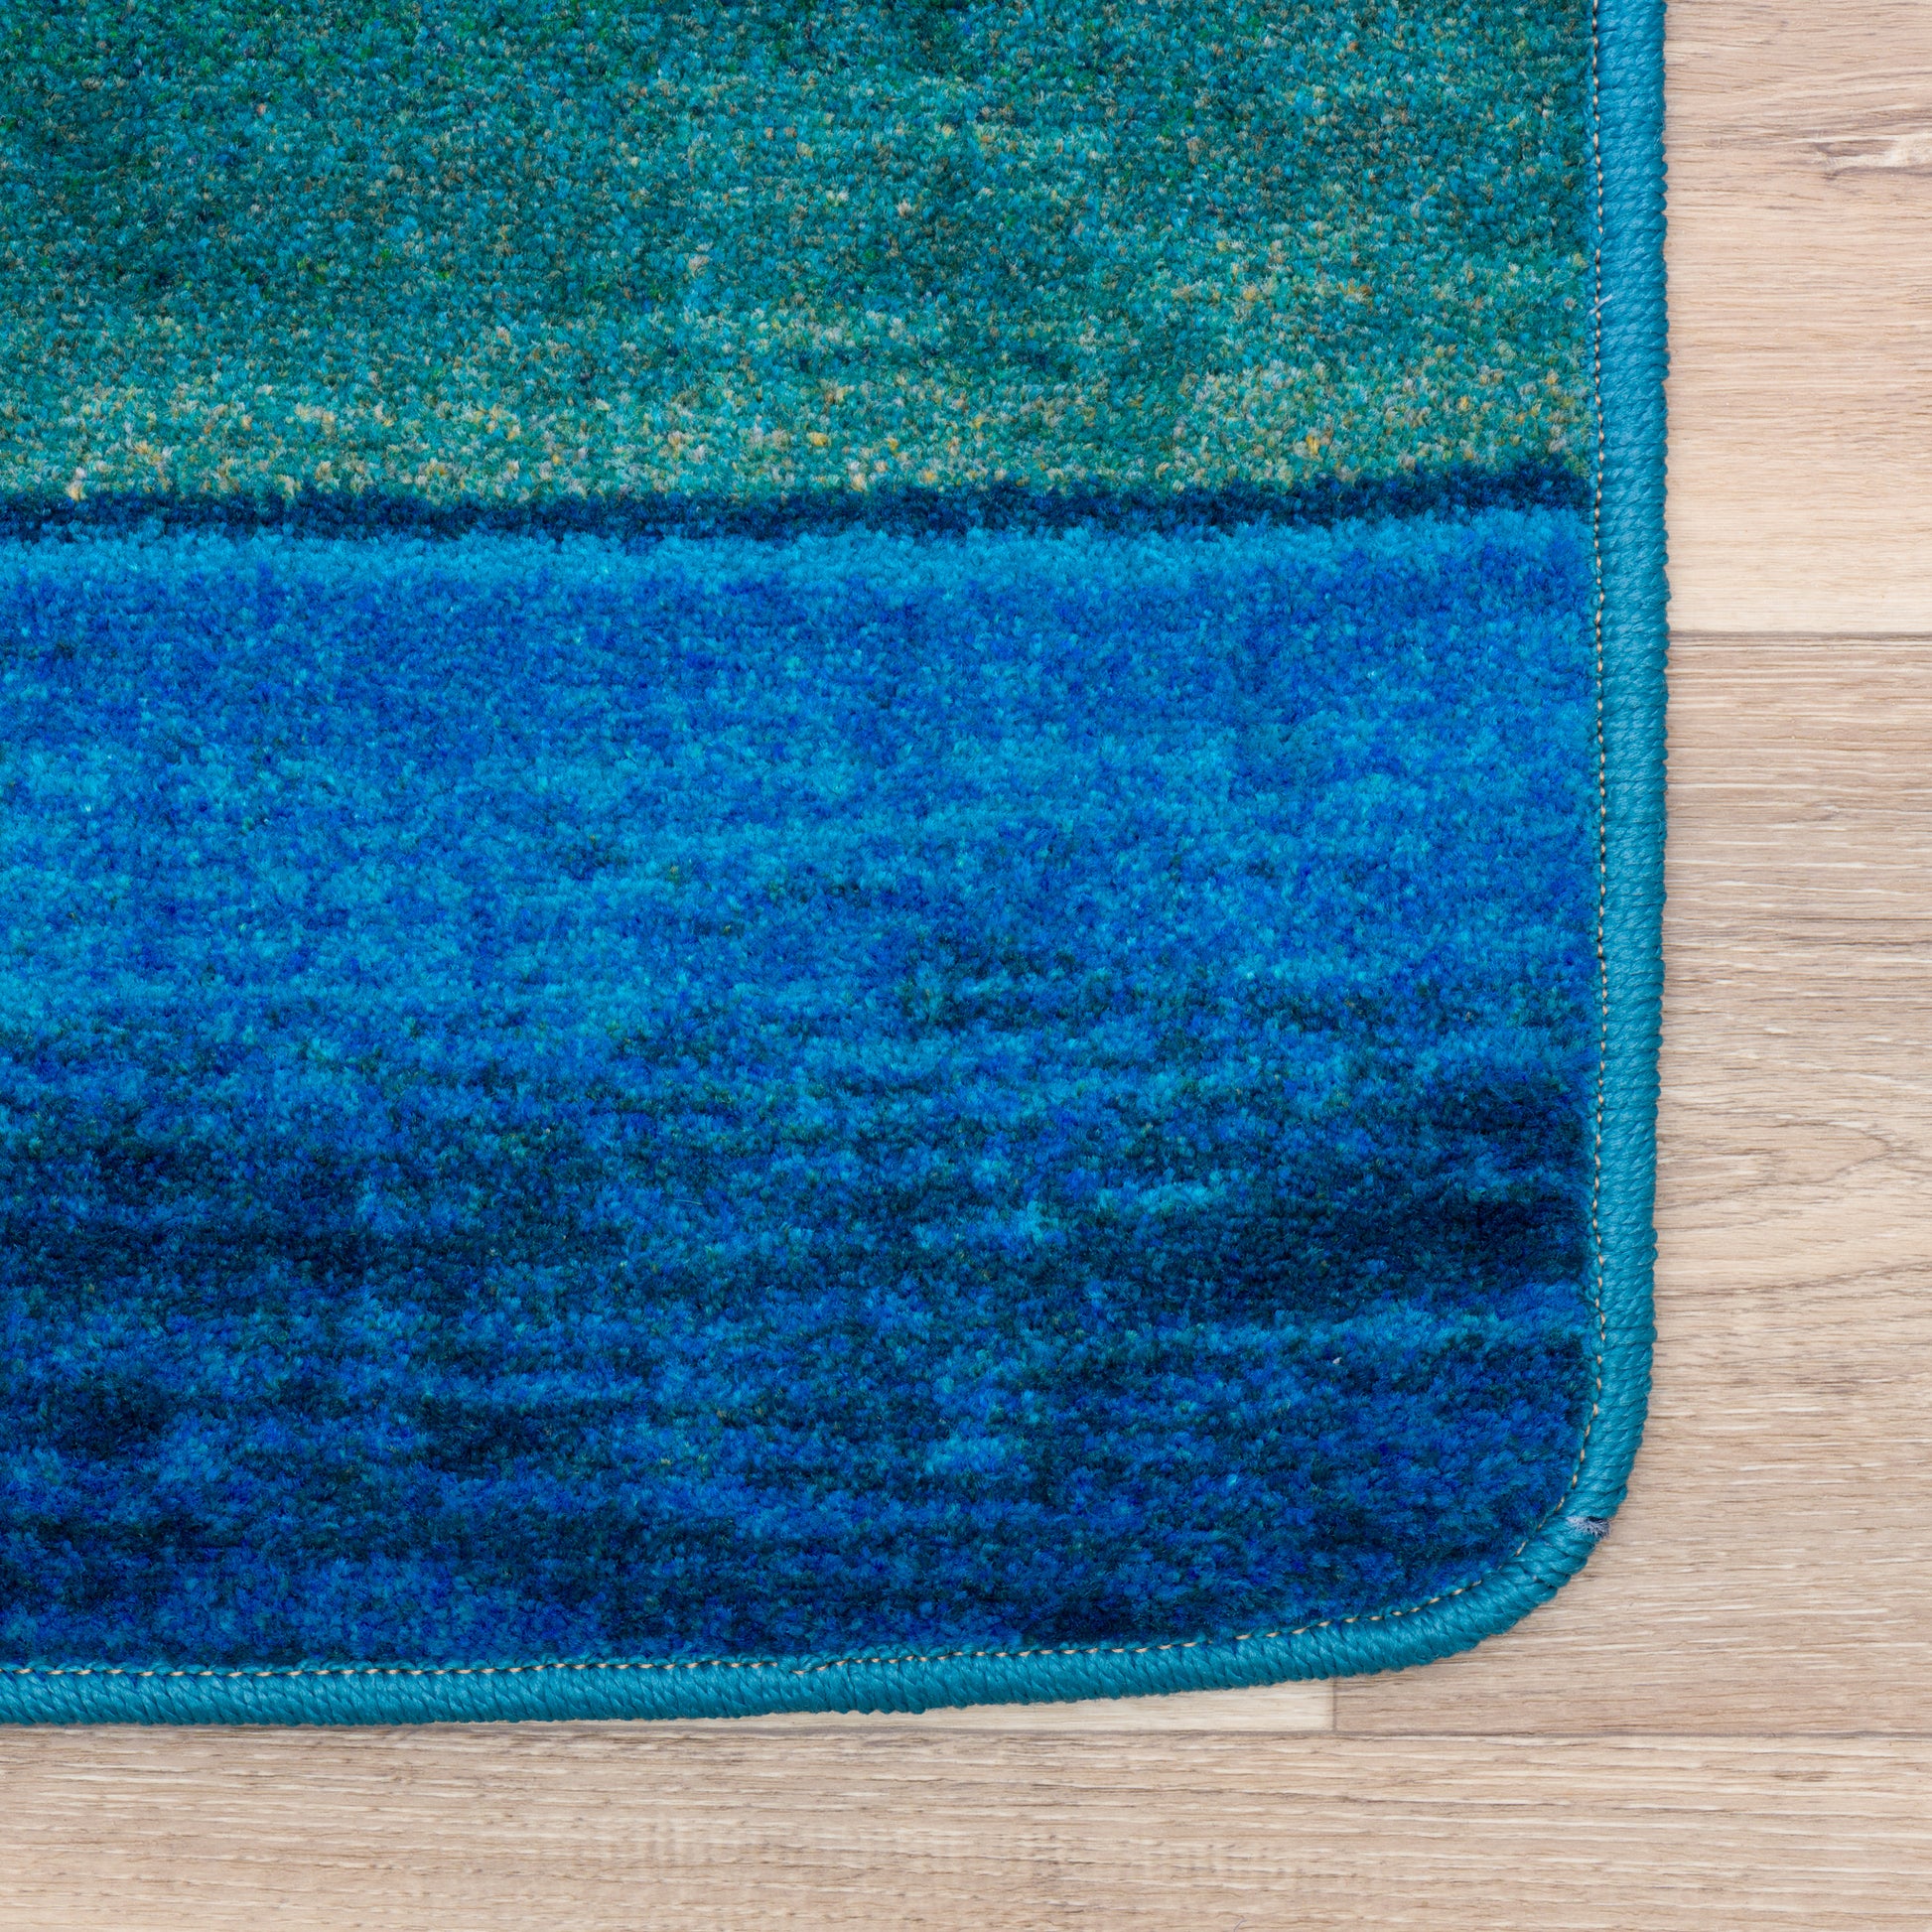 Tranquil Oceanic Rug in Turquoise and Deep Jade Tones